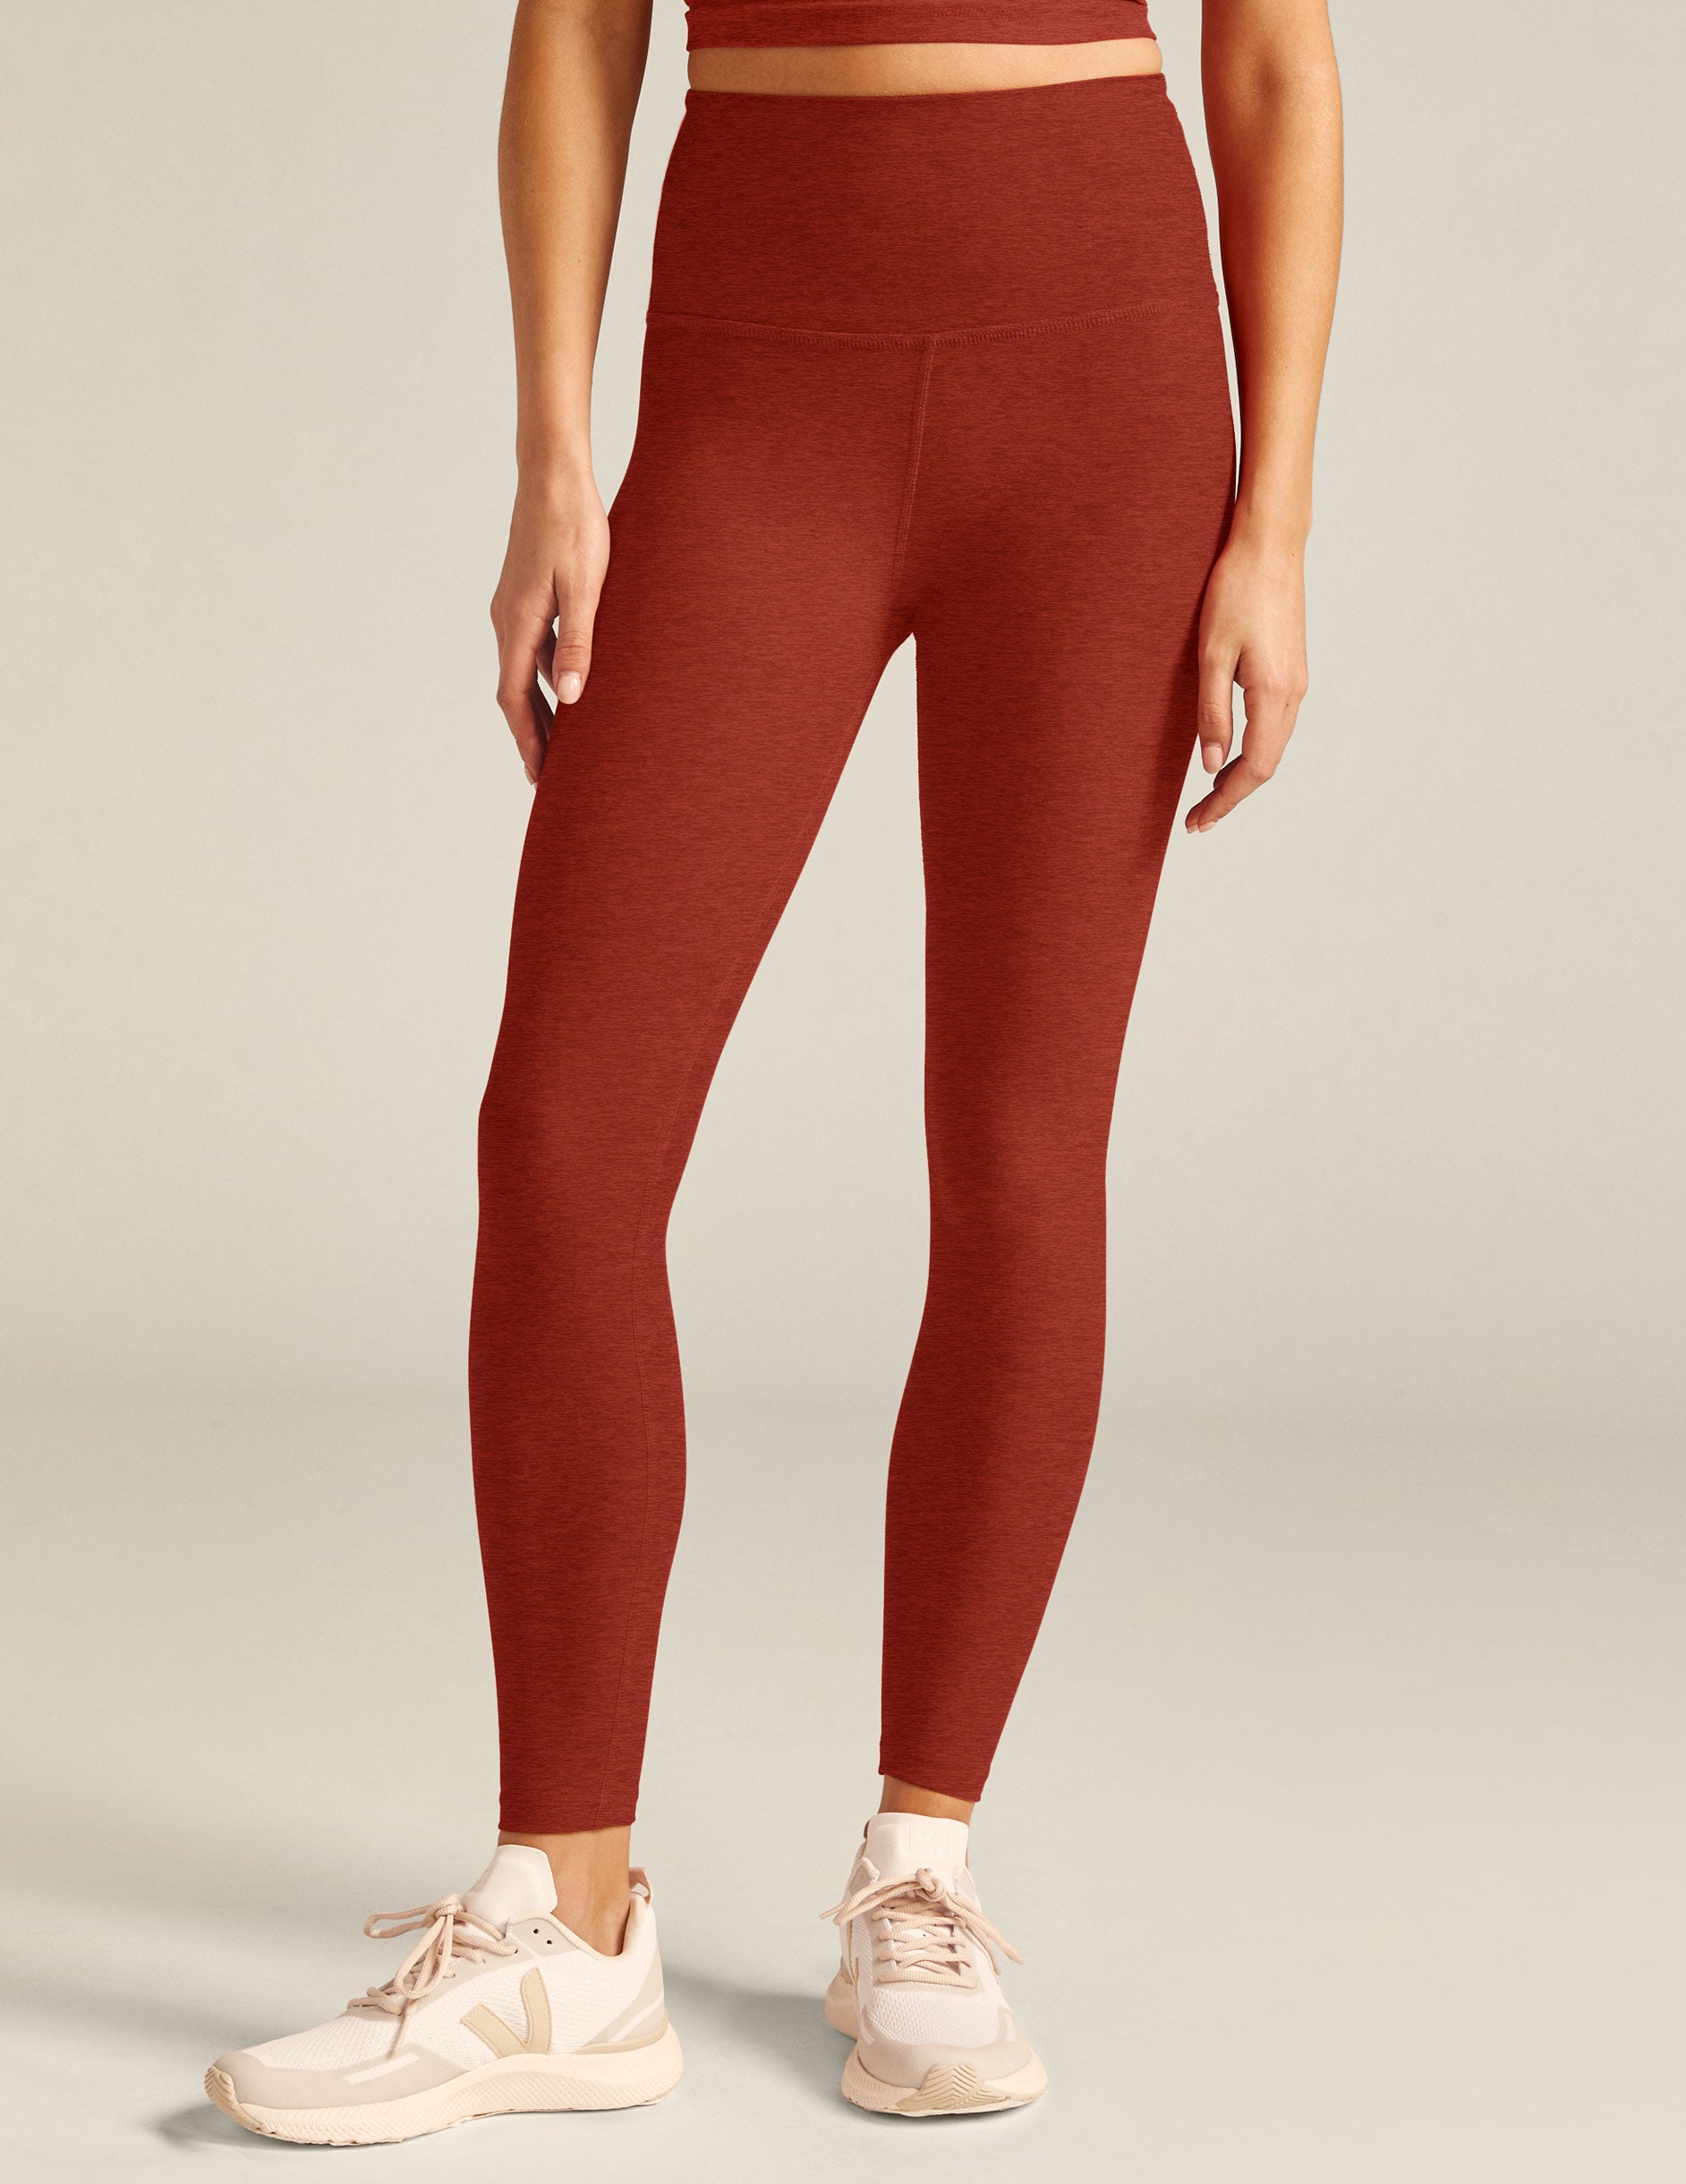 Beyond Yoga Spacedye Caught In The Midi High Waisted Legging in Clove Brown  Heather